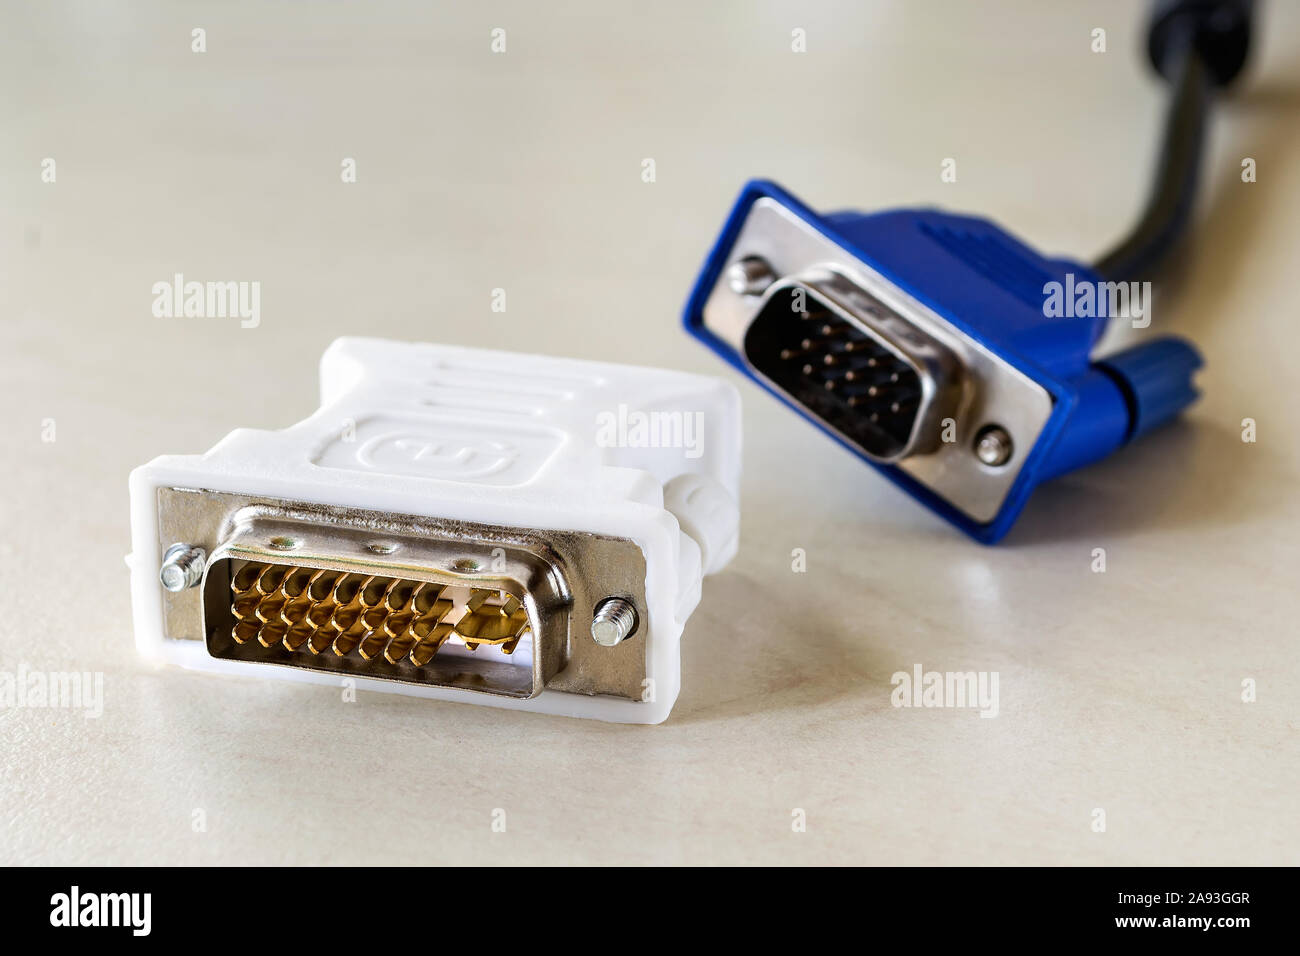 Dvi-d socket of white adapter for blue vga socket monitor cord behind it.  Connection of computer devices with plugs of different types. Close-up  Stock Photo - Alamy